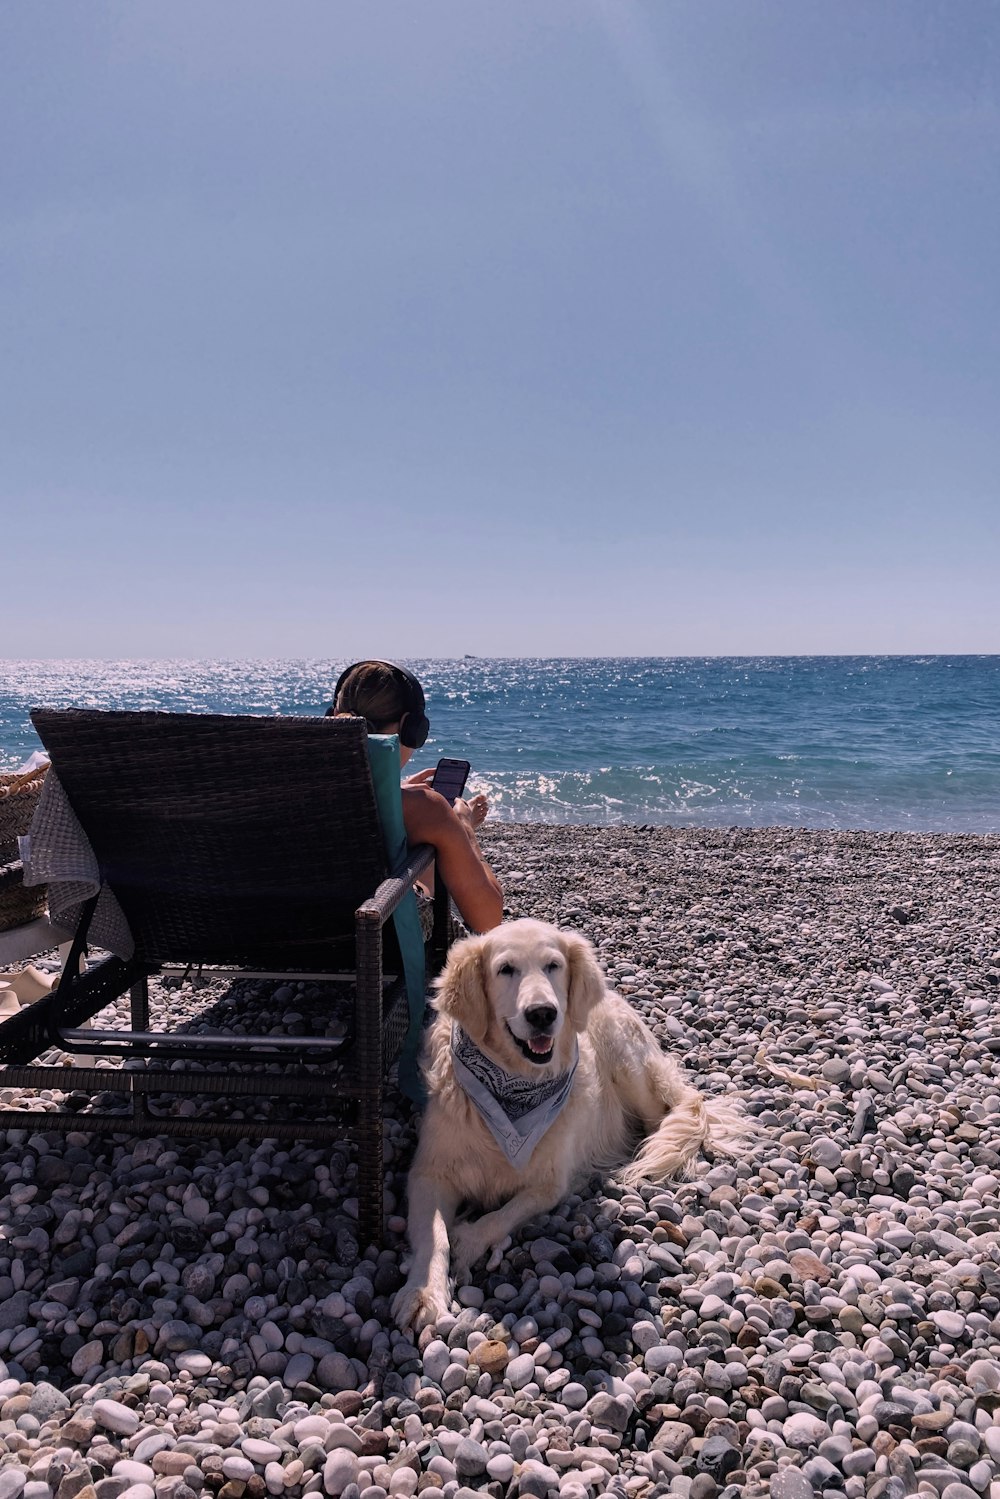 a person sitting on a beach with a dog